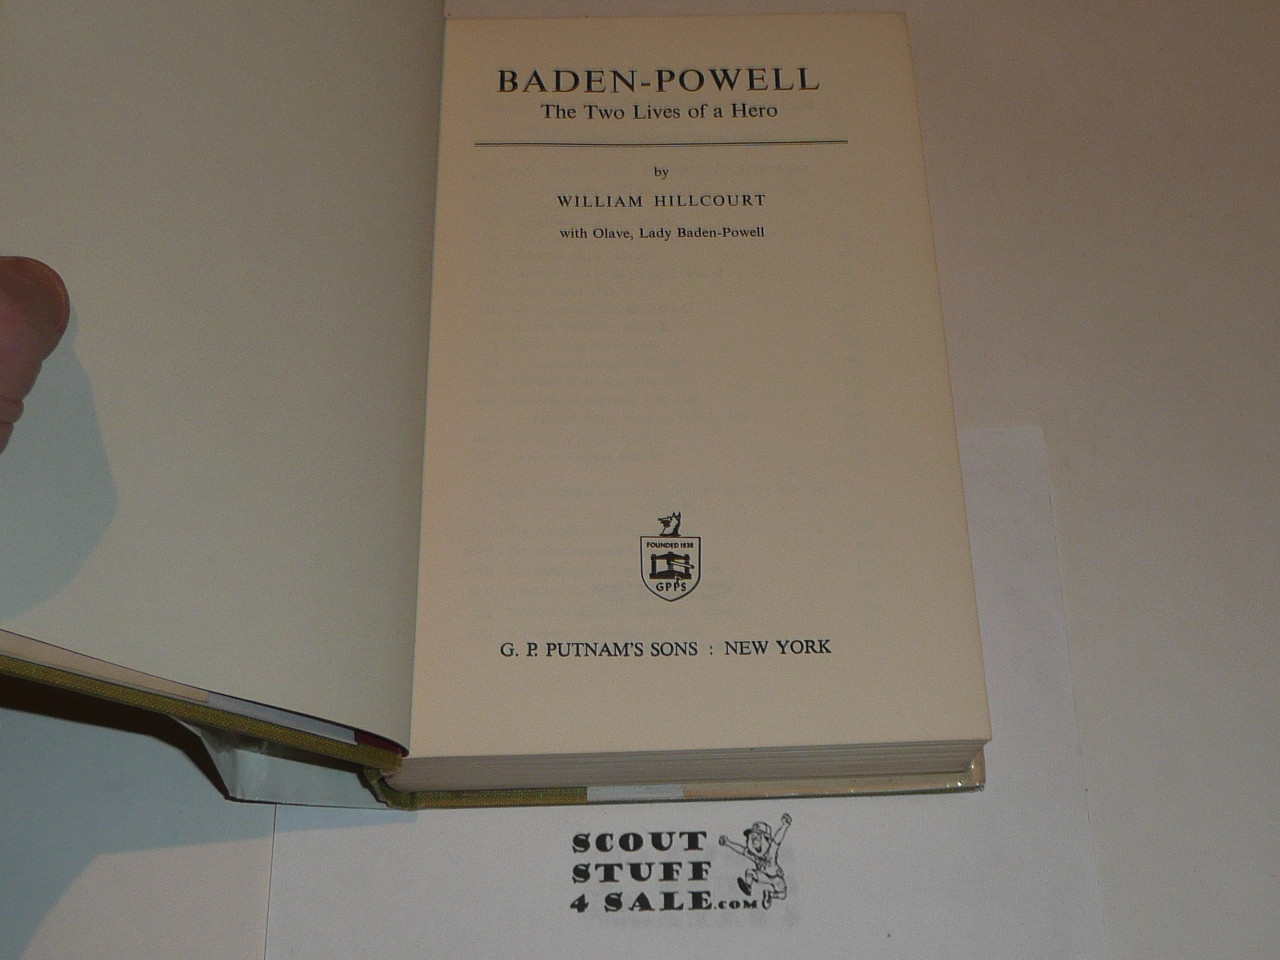 1964 Baden-Powell The Two Lives of a Hero, By William Hillcourt, first American Ed, with dust jacket